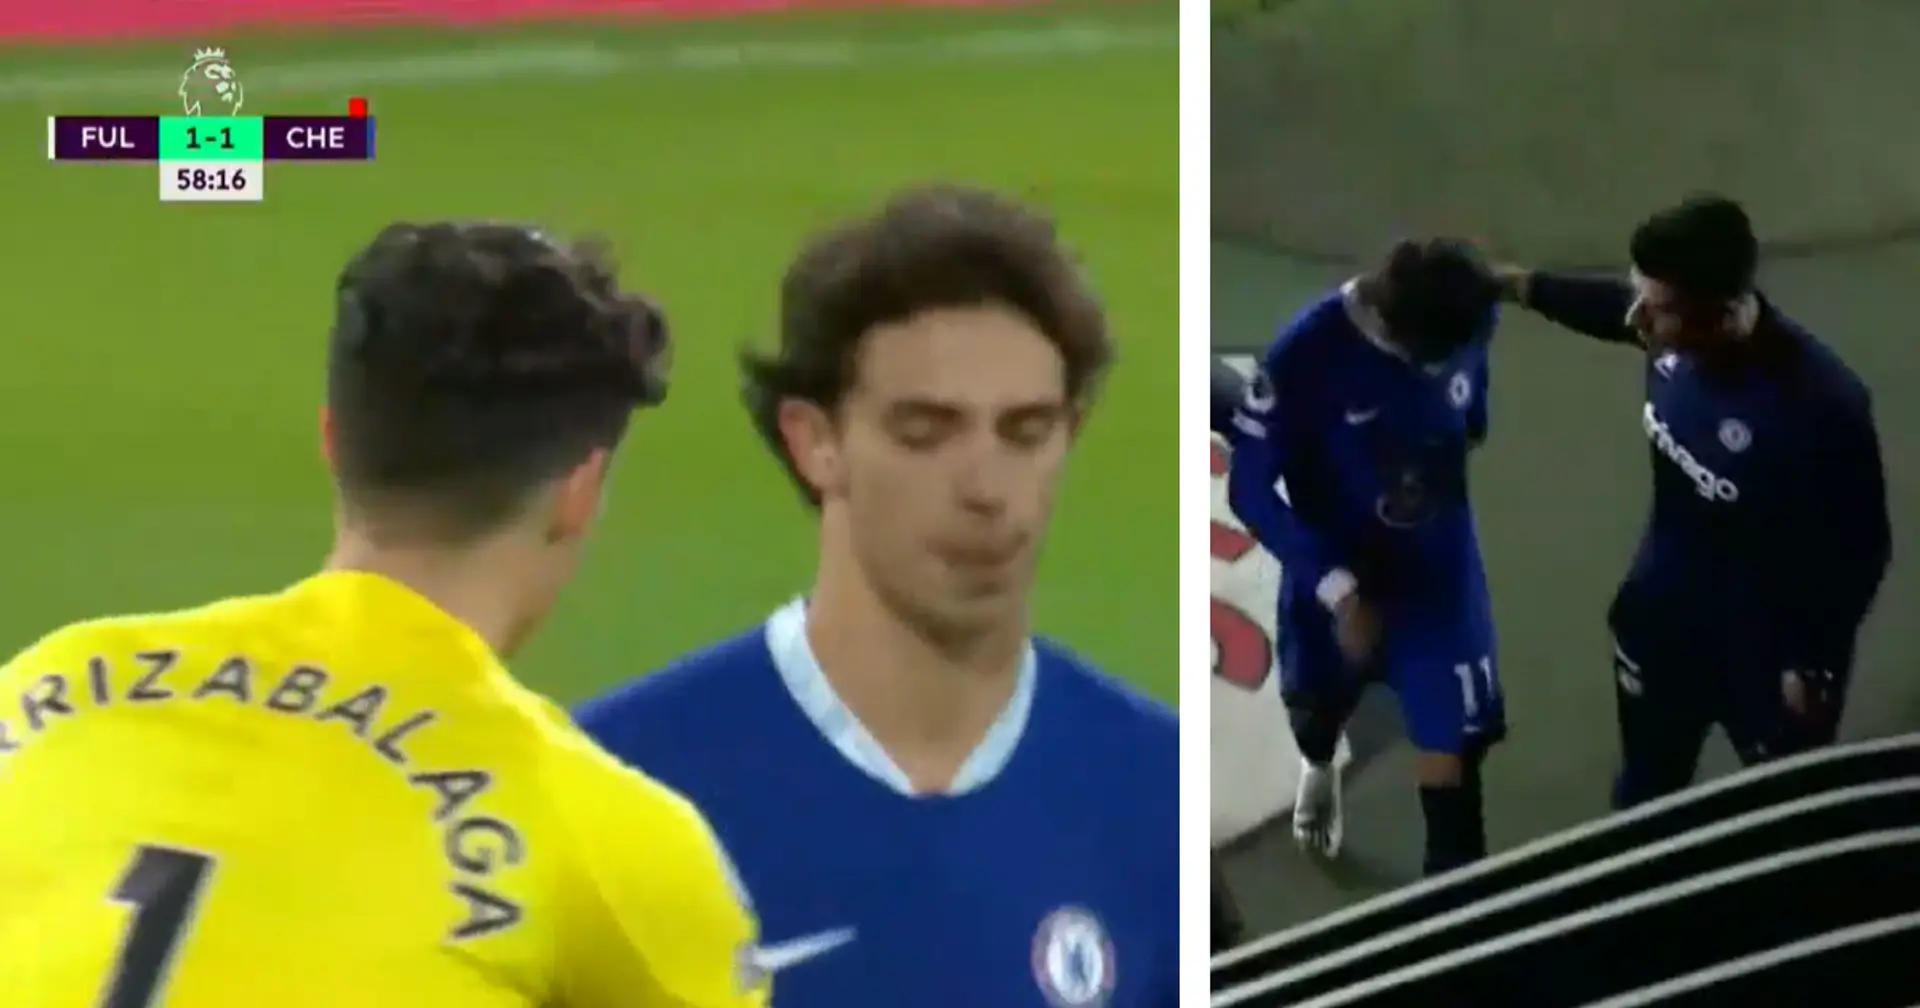 Spotted: Chelsea teammates approach Joao Felix on his way off the pitch following red card